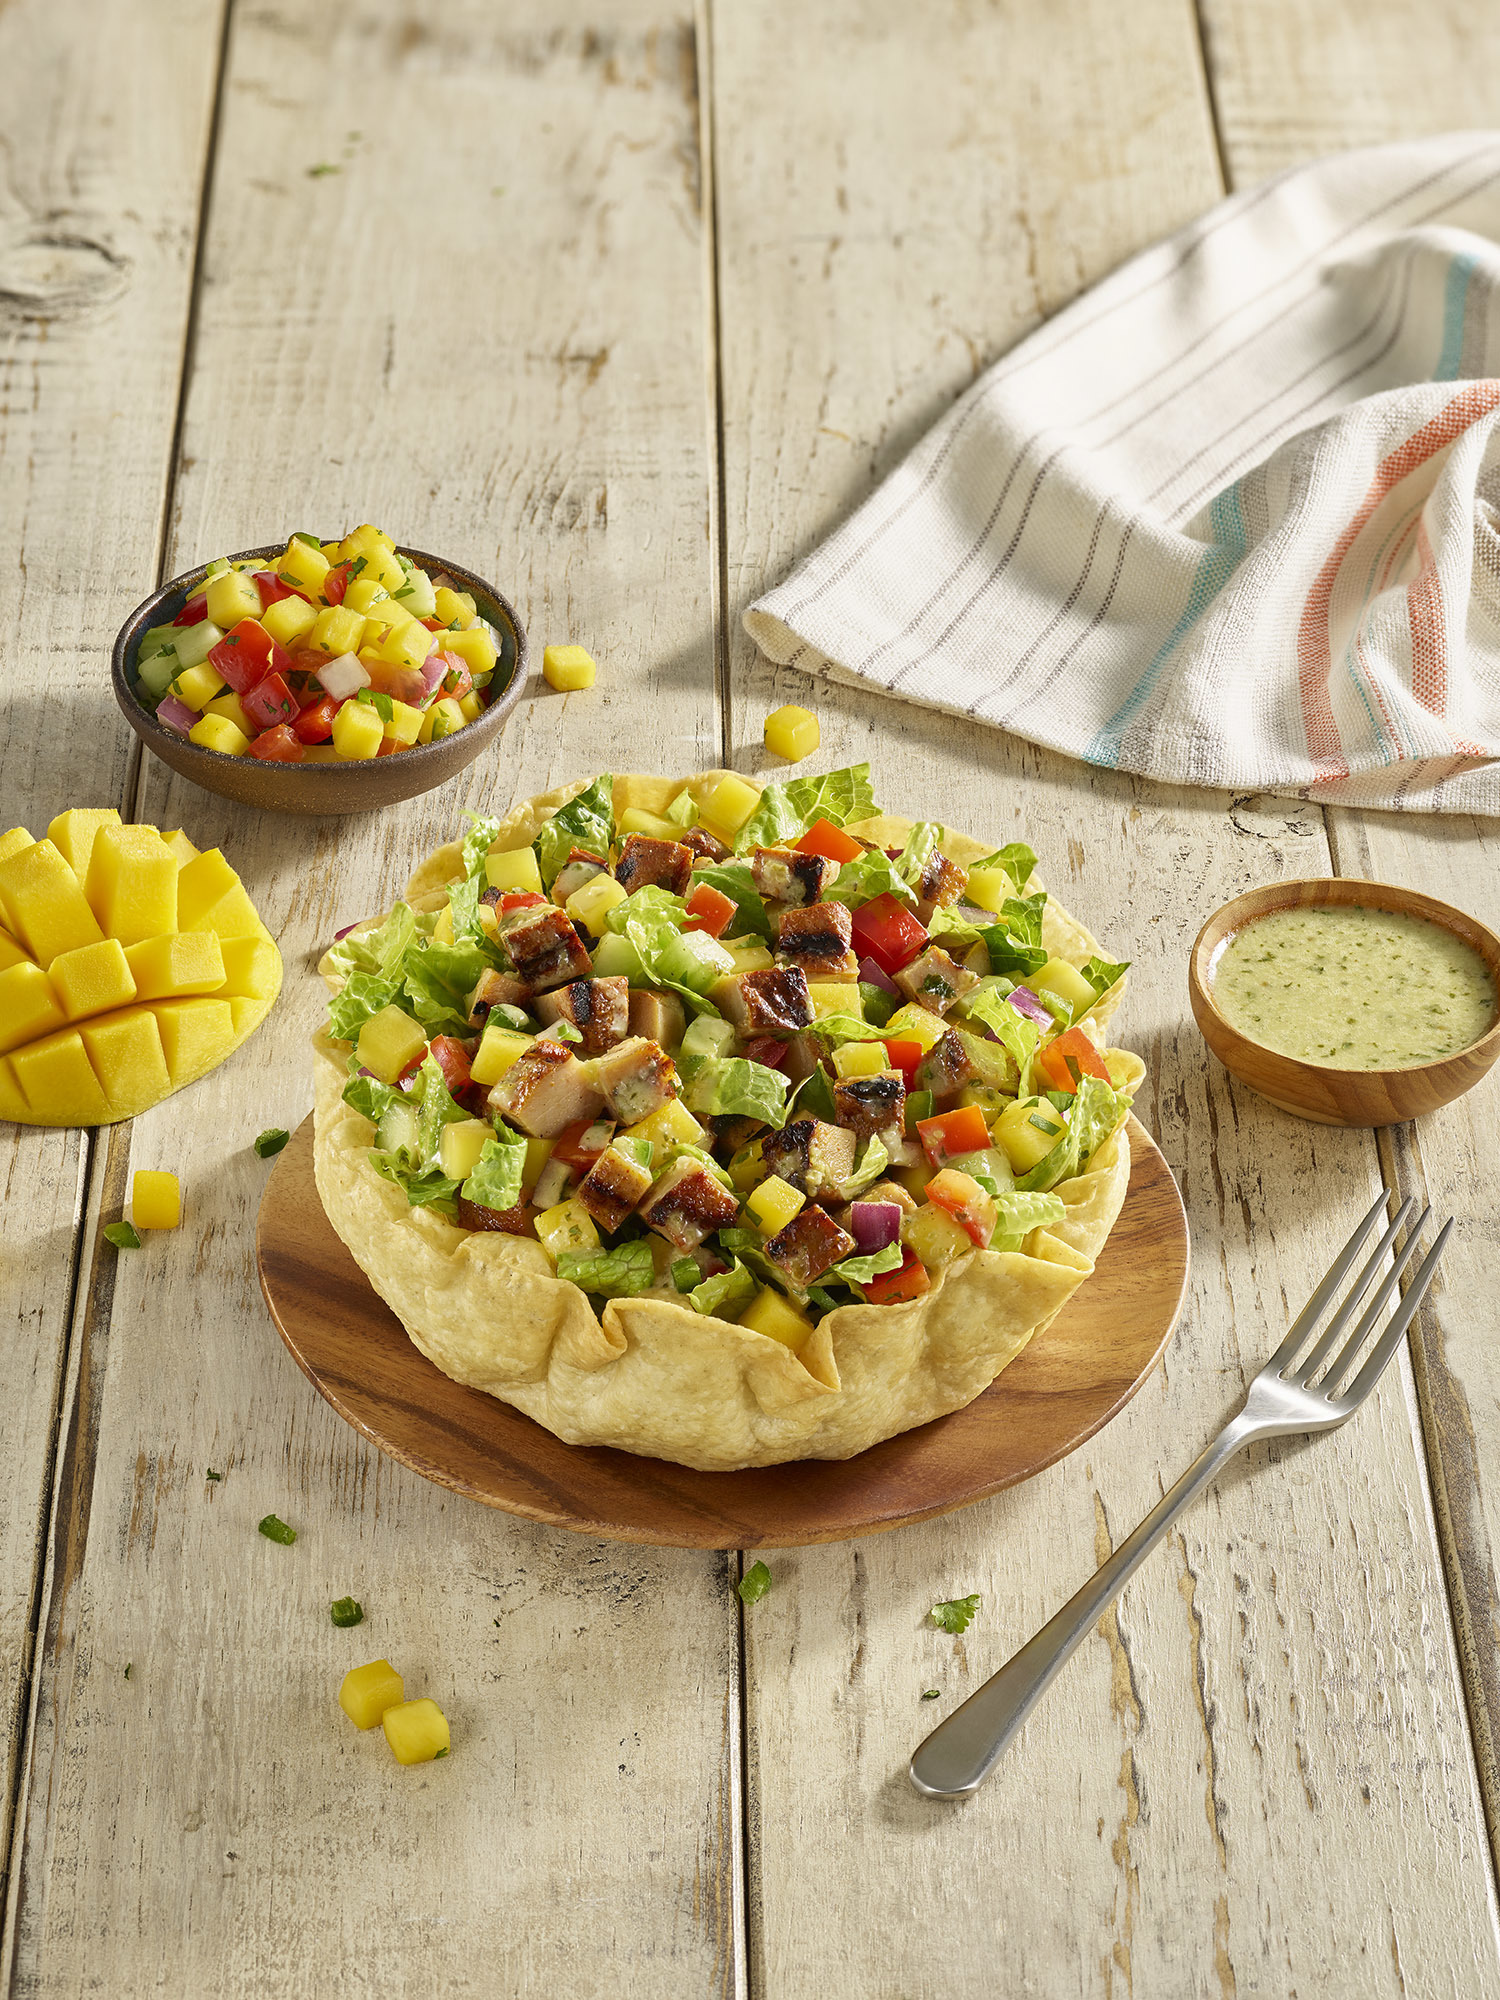 Qdoba Mexican Eats Reinforces Commitment To Fresh Food With Return Of Mango Salsa Business Wire